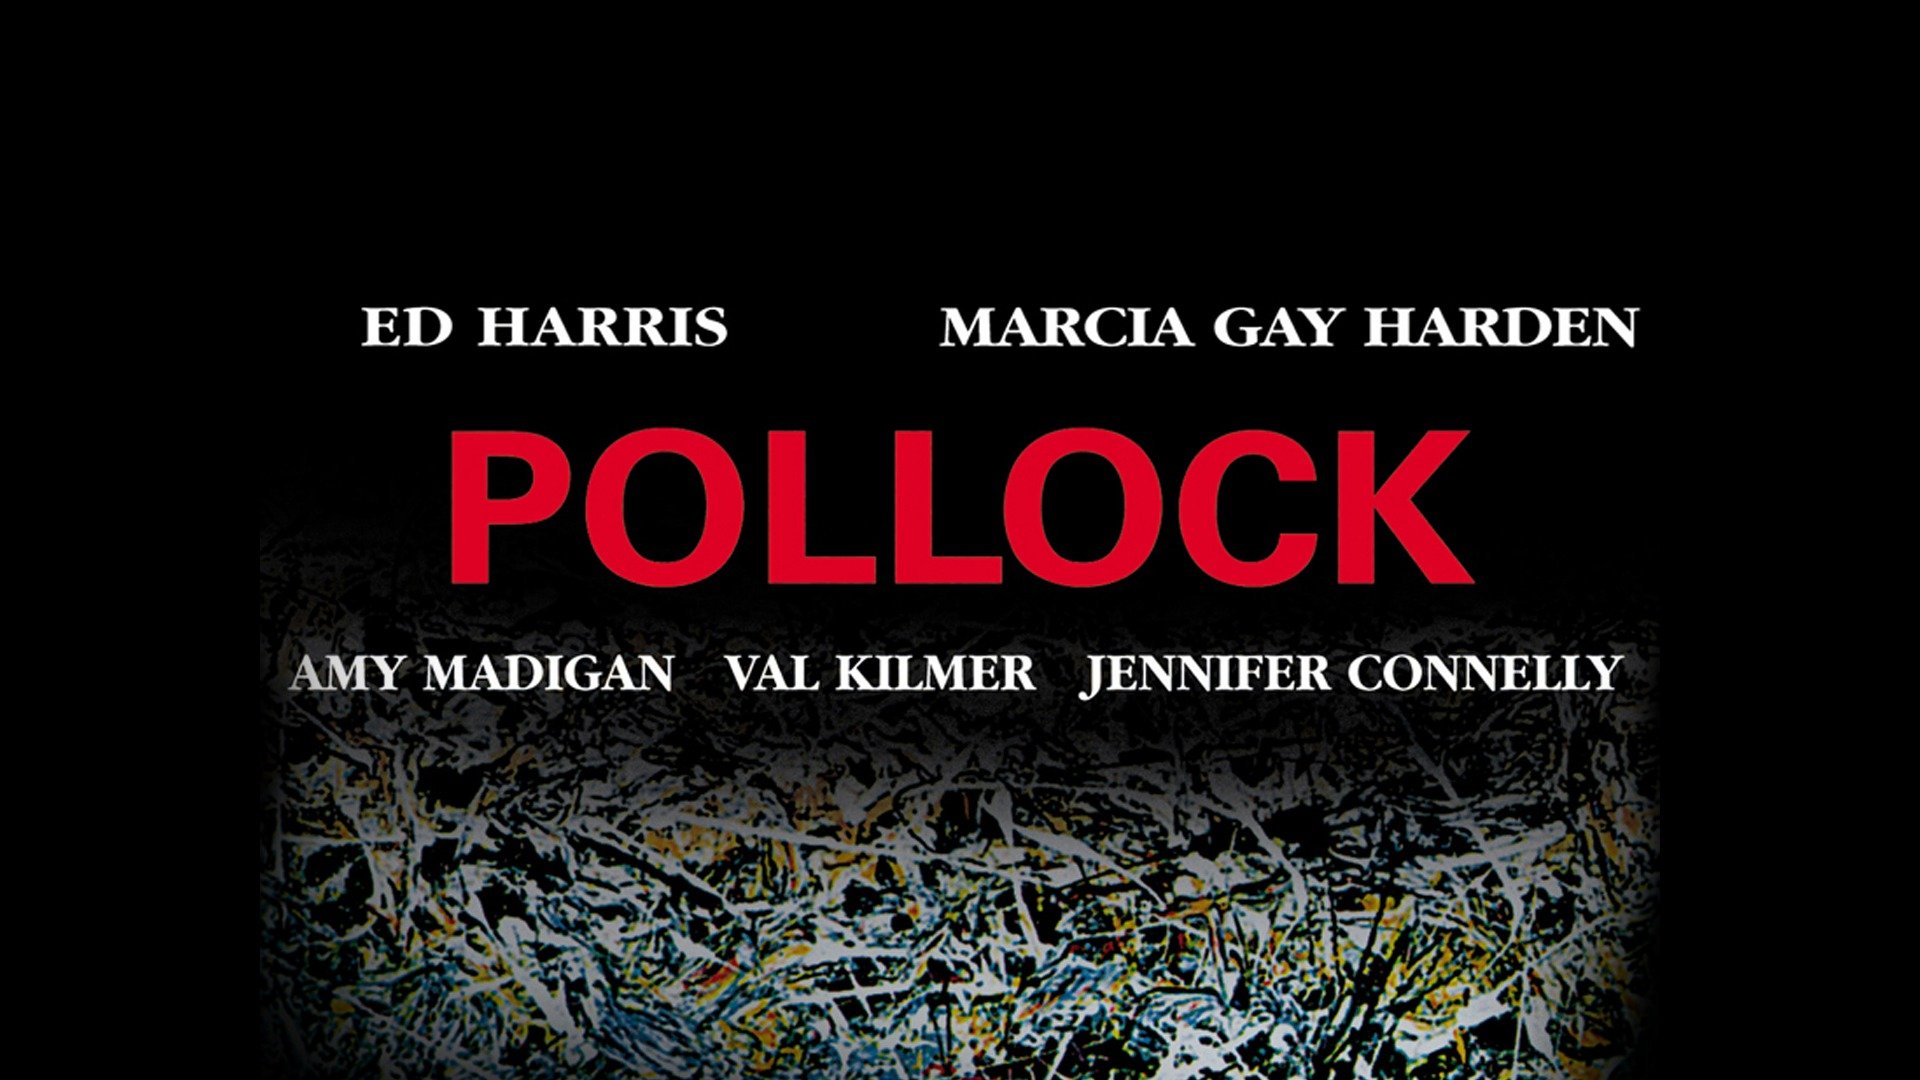 47-facts-about-the-movie-pollock